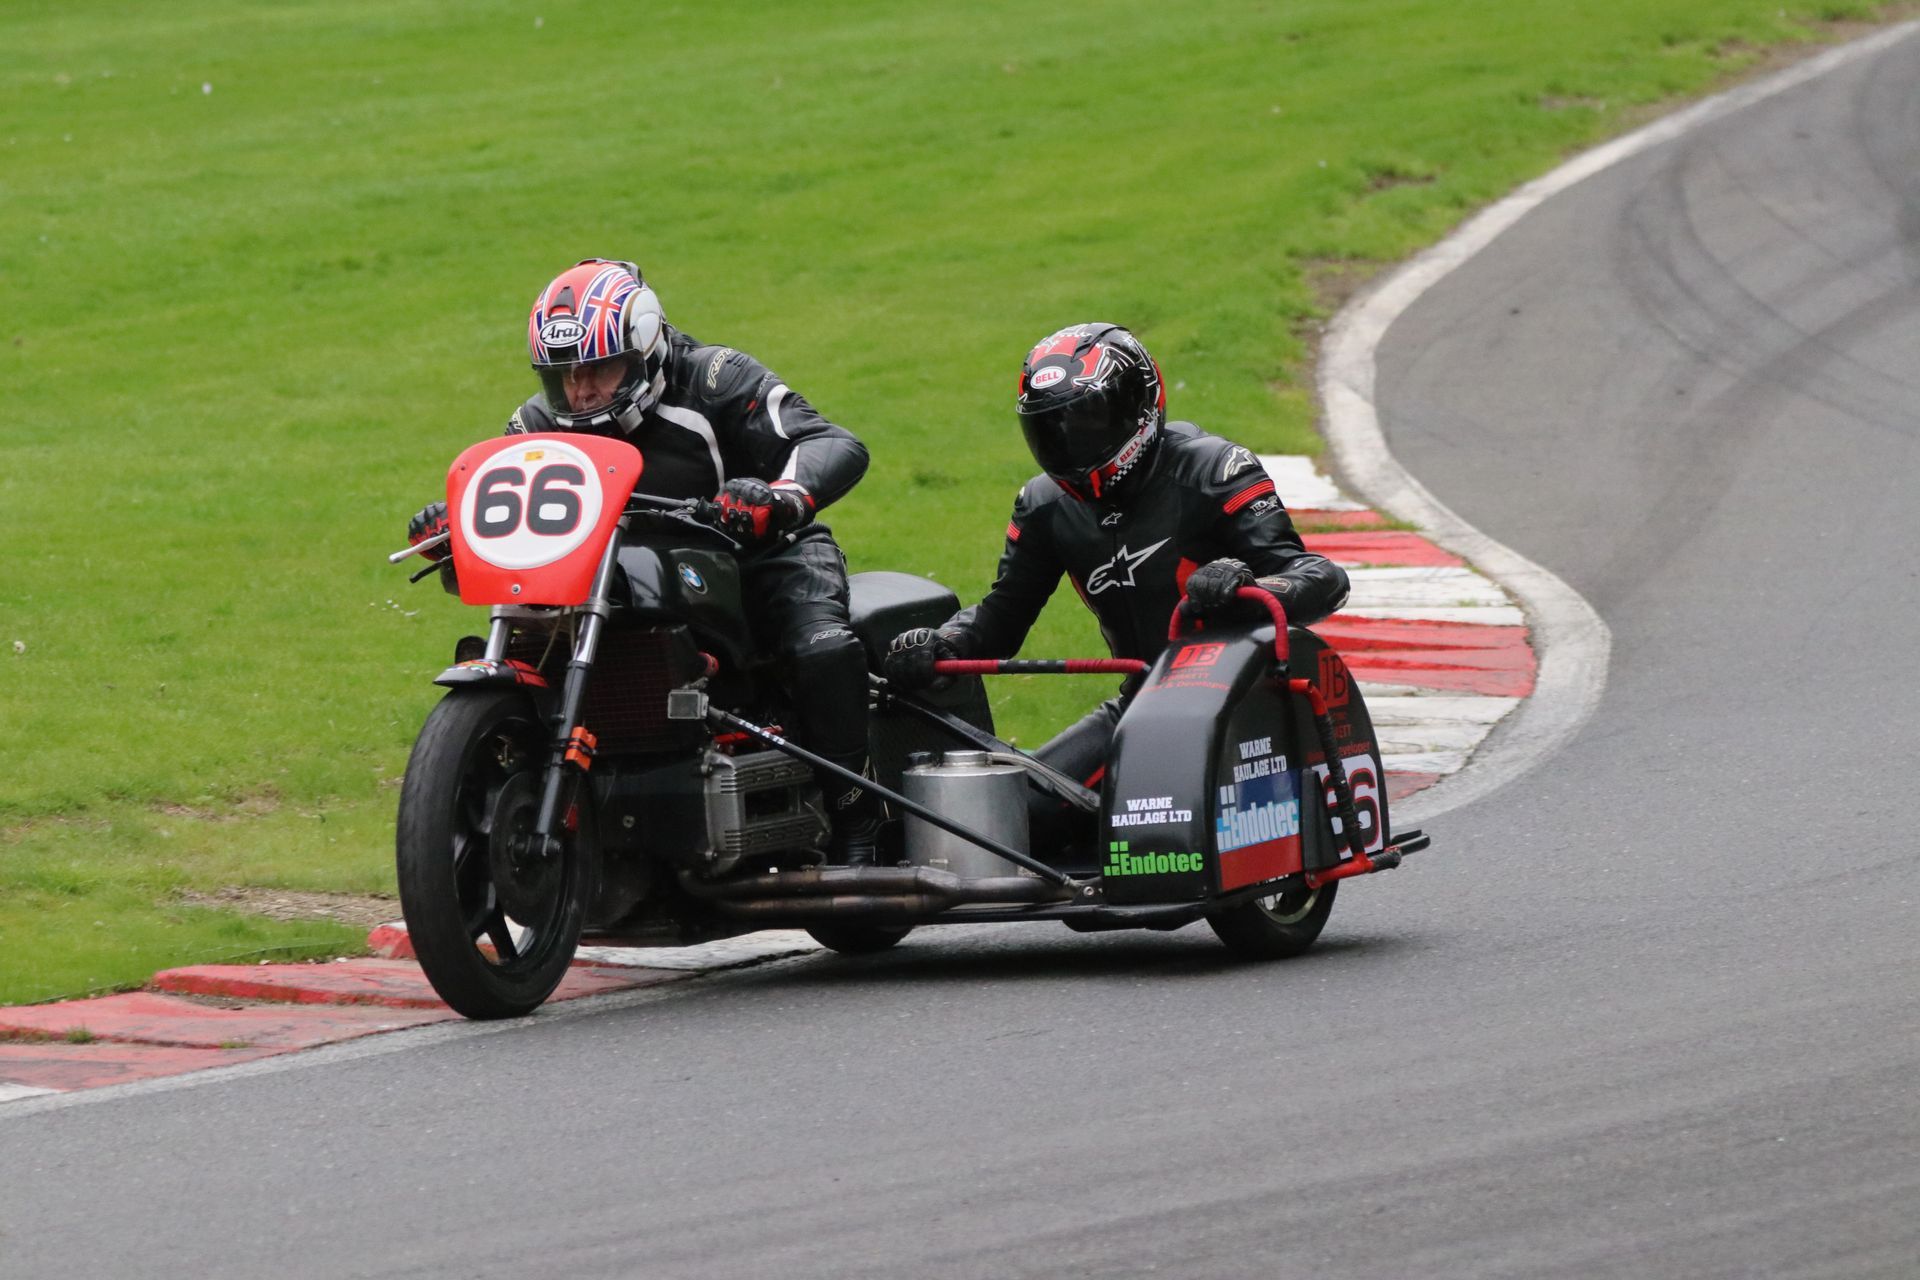 B.E.A.R.S British, European, American Racing and Supporters Sidecar Racing